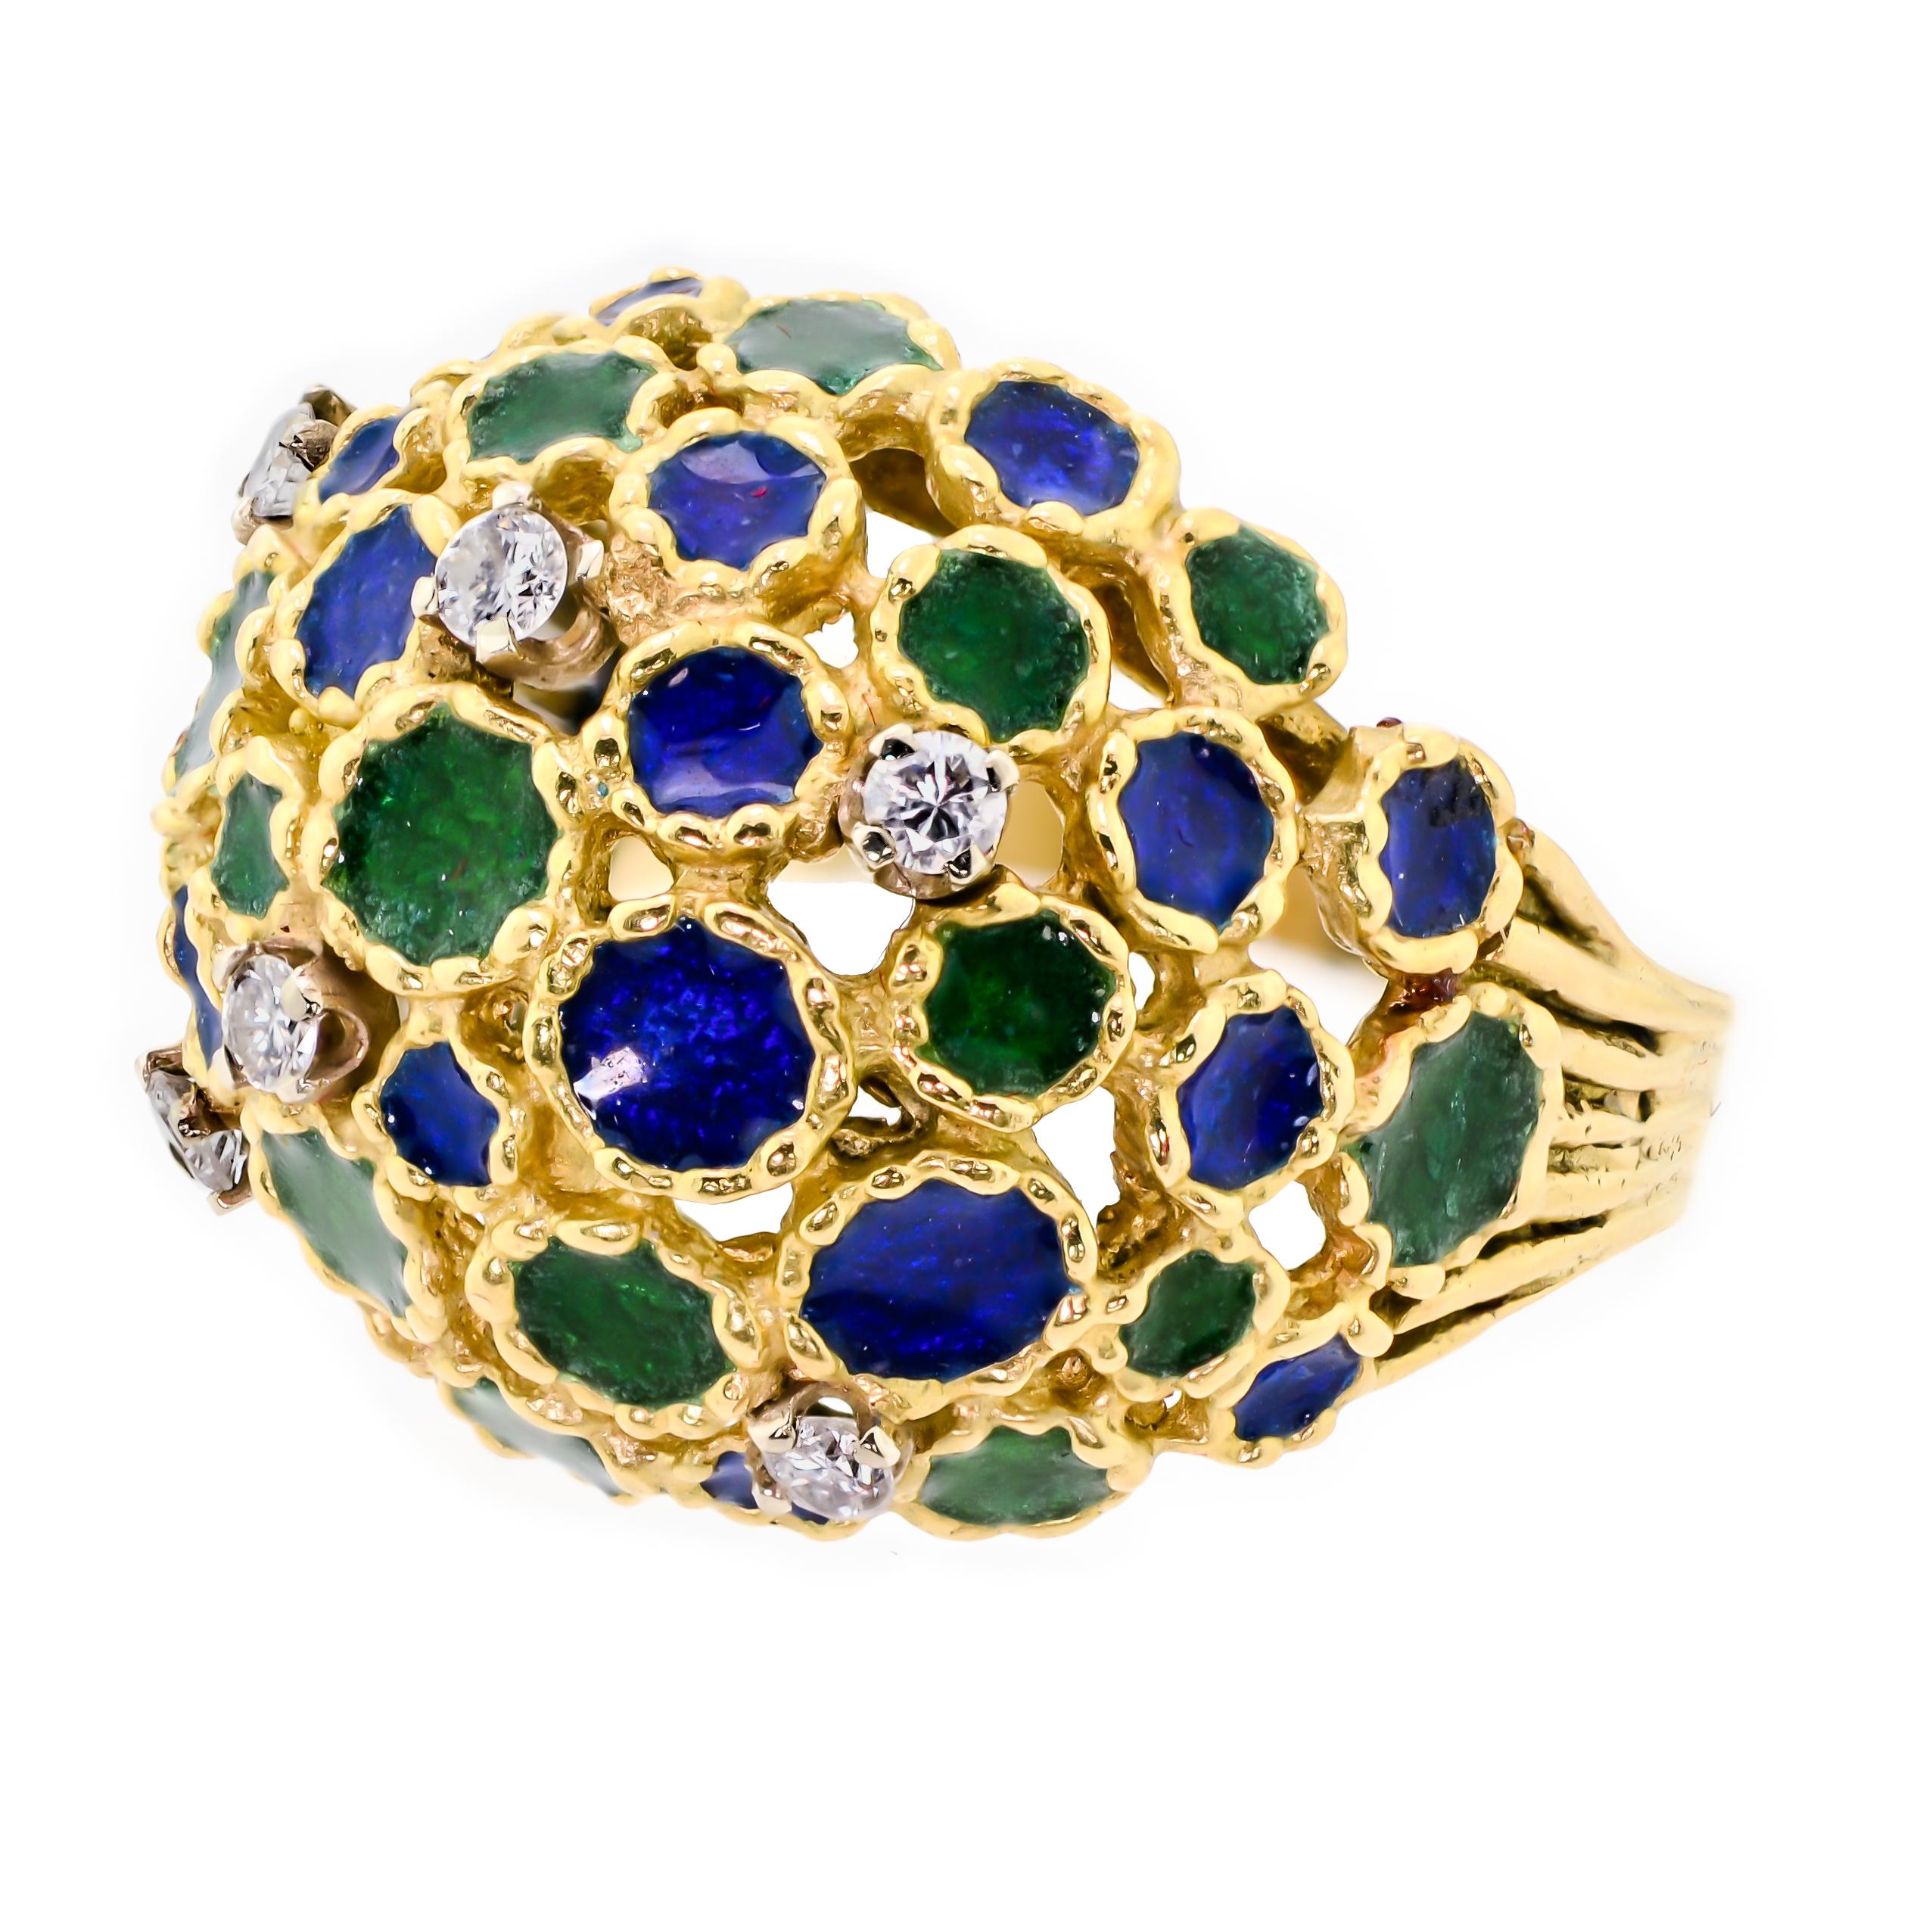 Cool, fun and funky are the perfect words to describe this Circa 1960 14kt yellow gold, diamond, blue, and green enamel dome-shaped bombe ring. This delightful, colorful ring is set with six modern cut diamonds that dazzle and sparkle amongst the